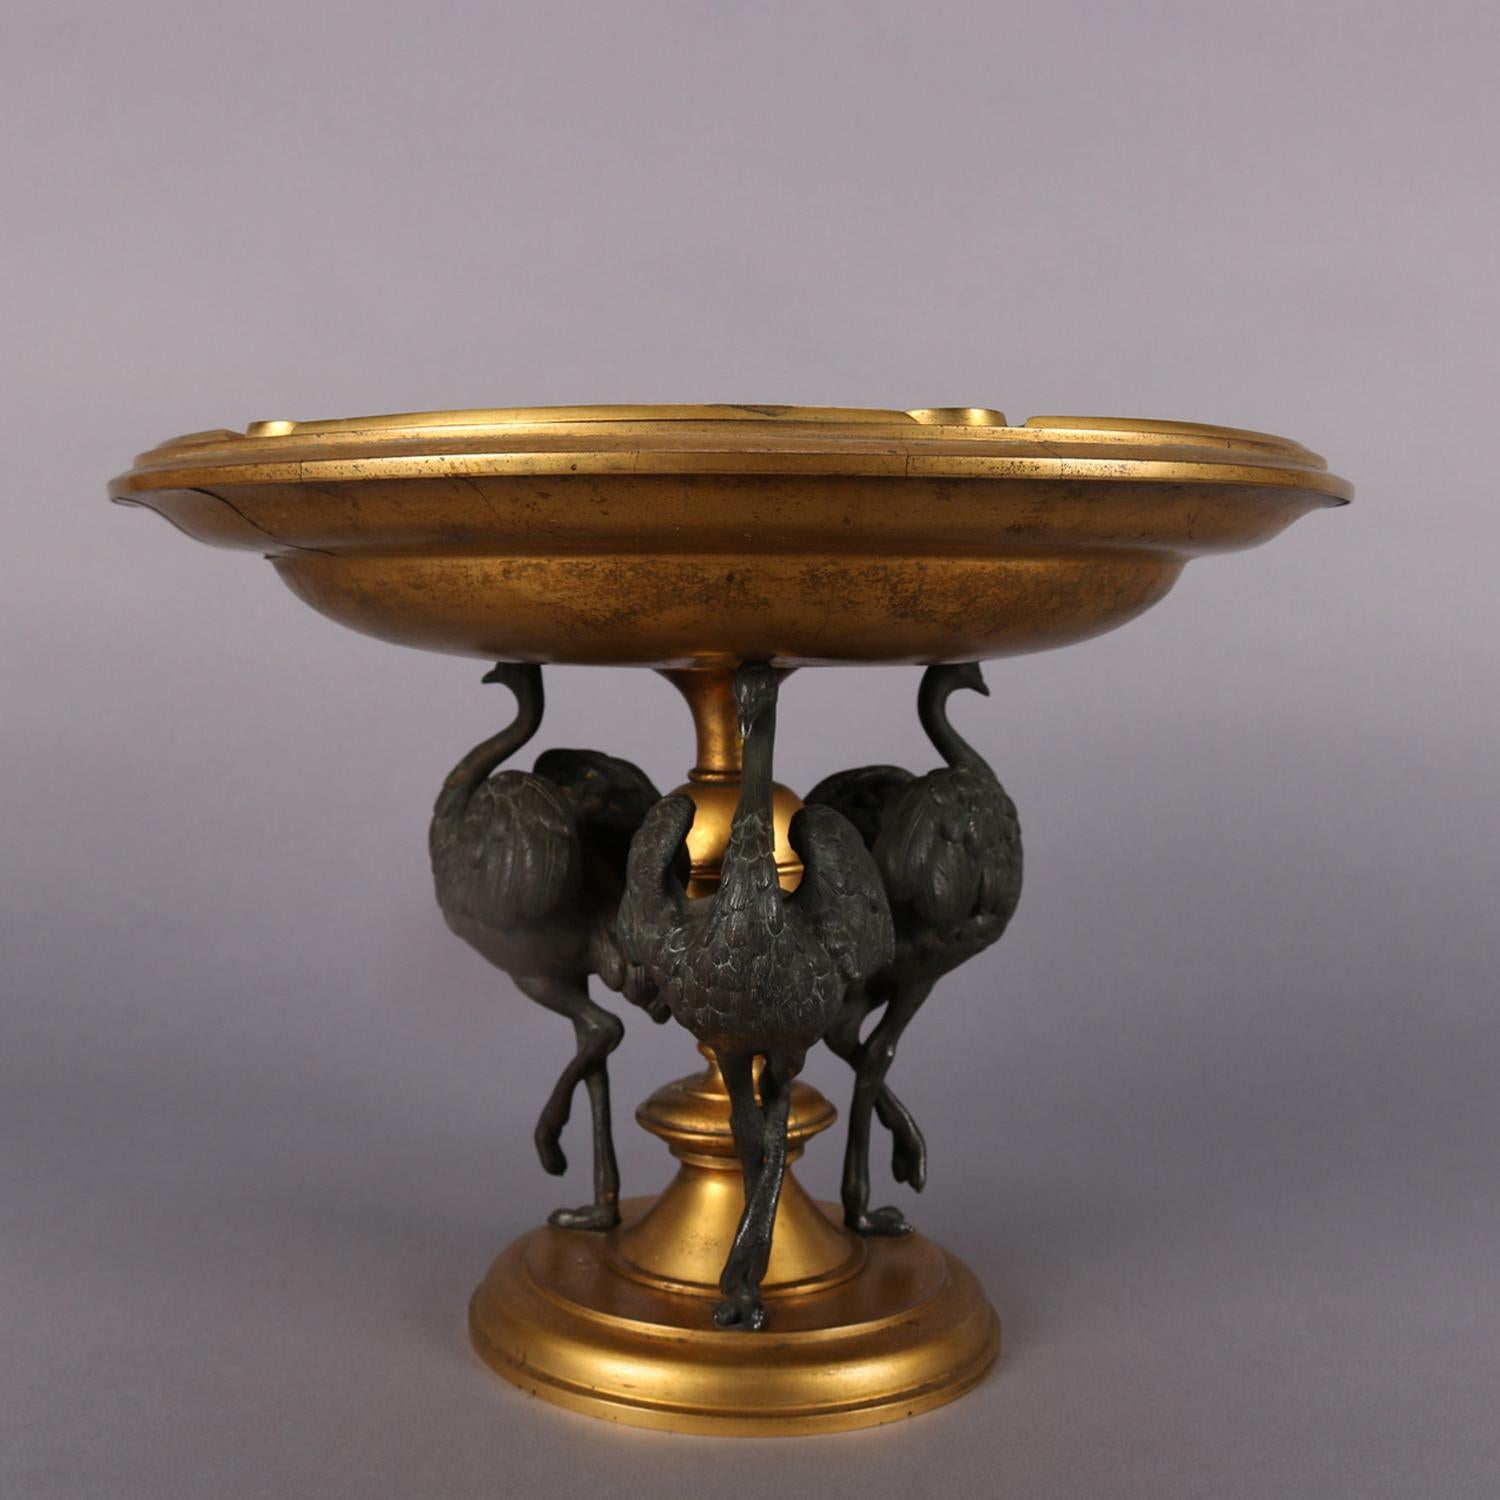 Antique Moorish gilt metal figural compote features bowl with enameled geometric decoration and supported by three cast emus, circa 1890.

Measures: 9.25